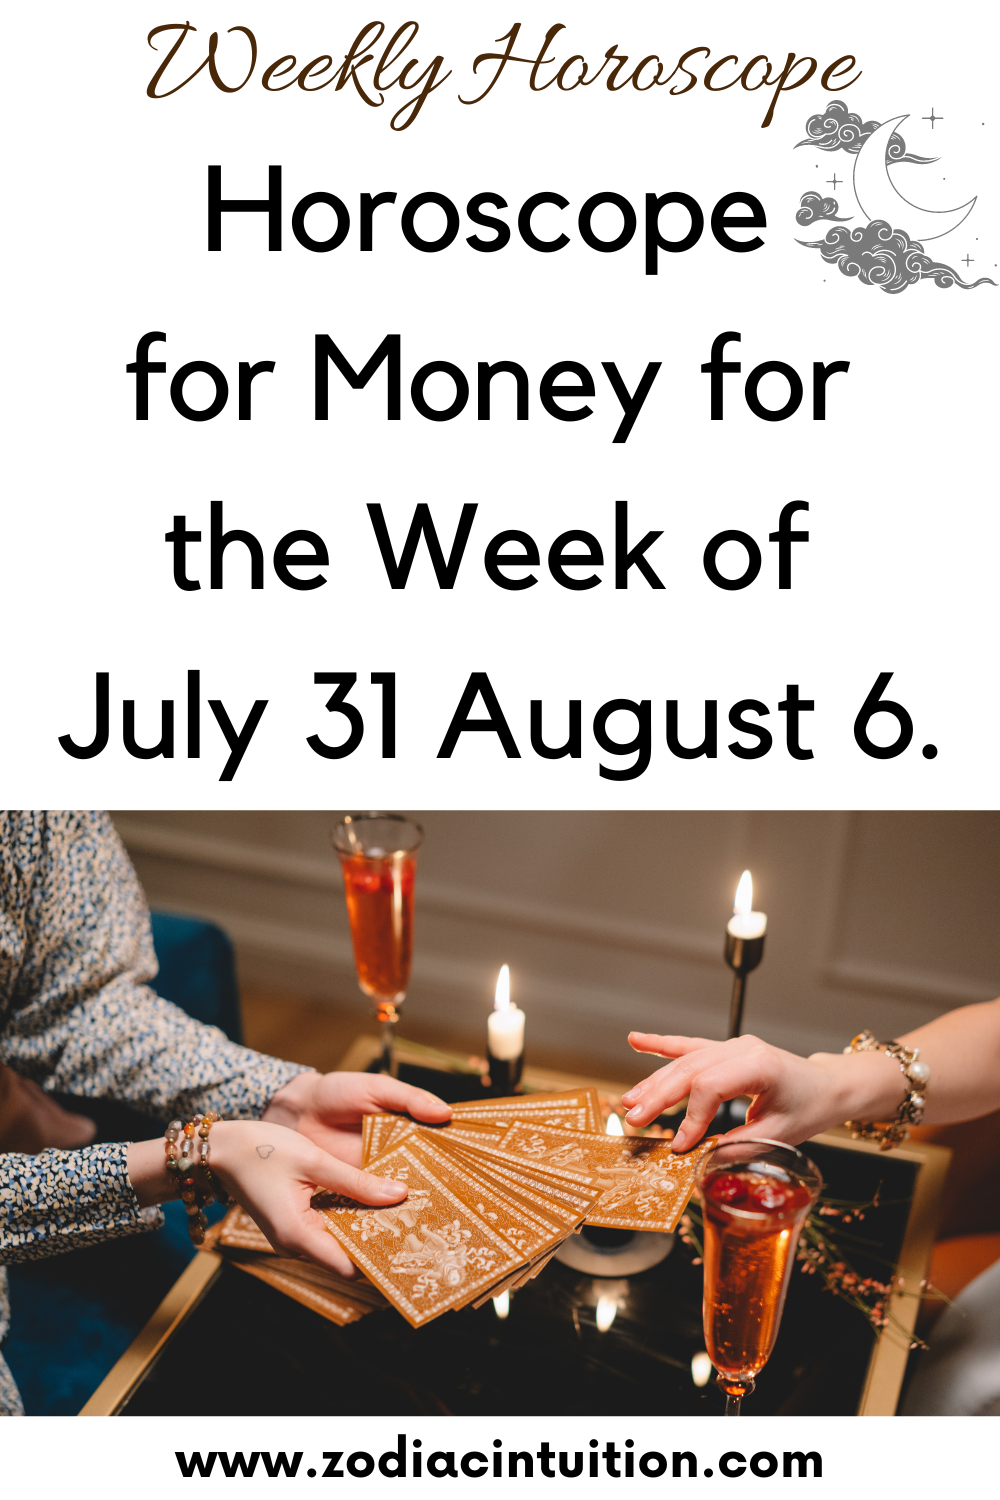 Horoscope for Money for the Week of July 31 August 6.